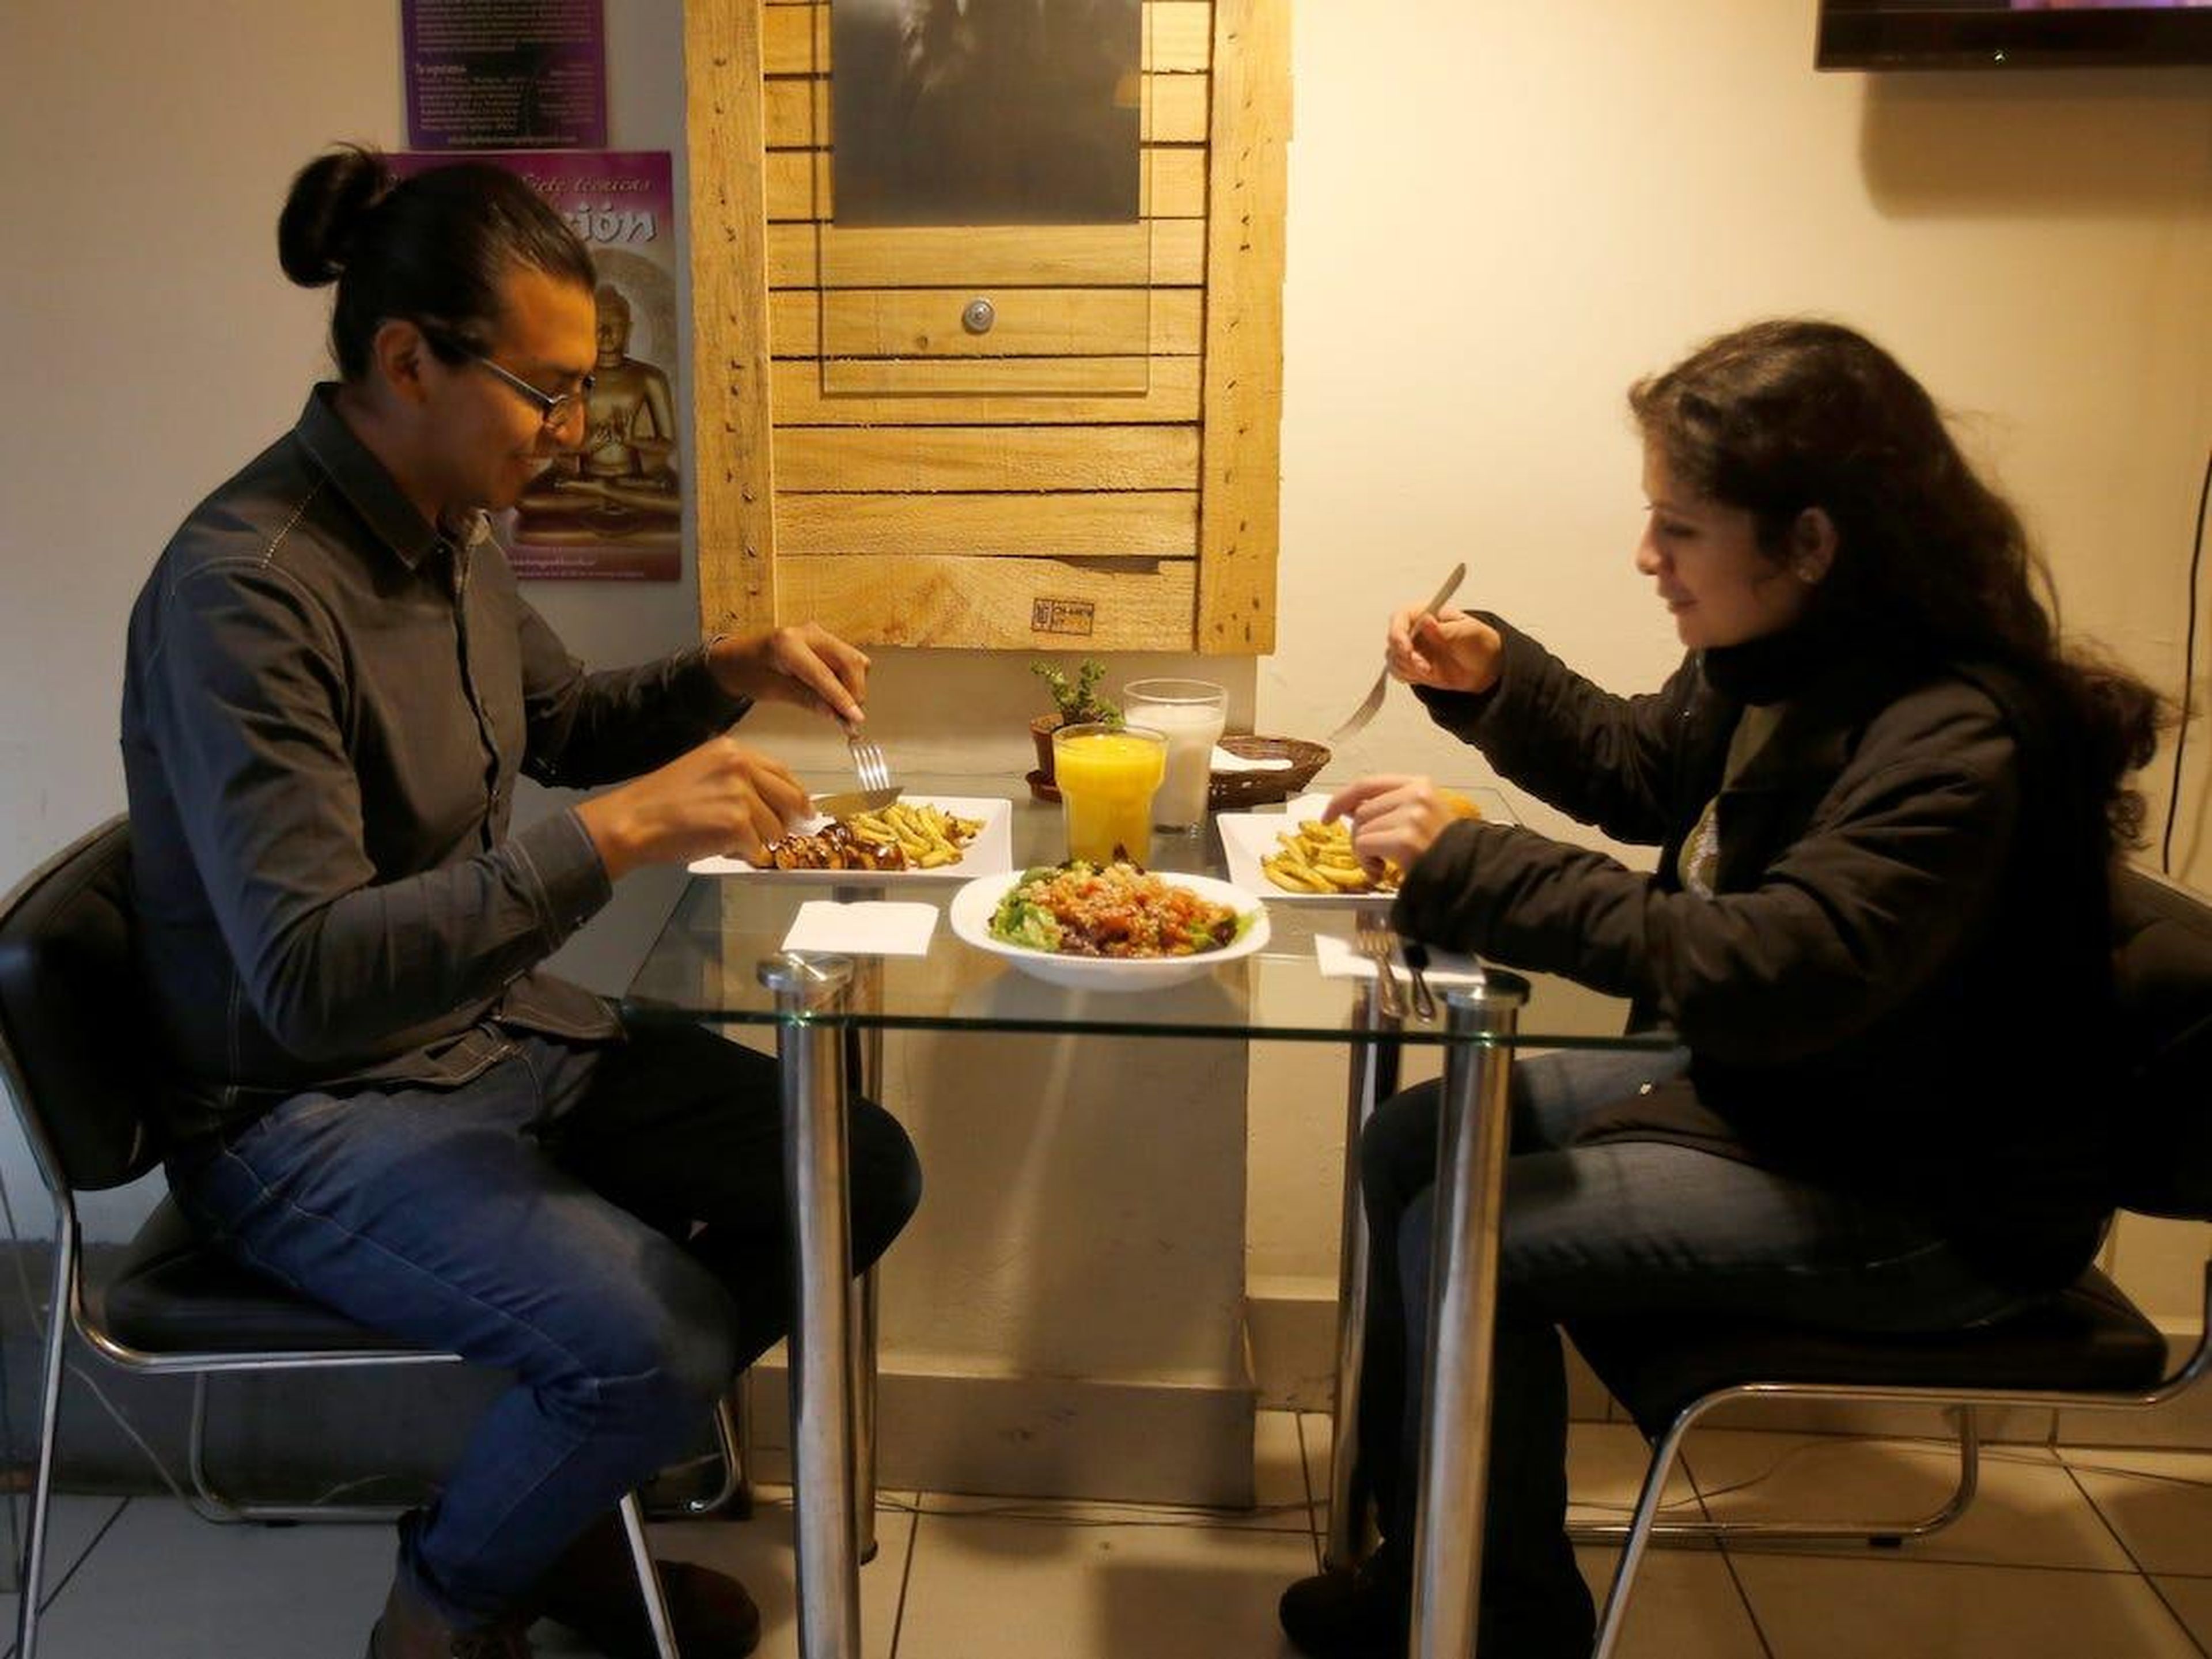 Two people eating.